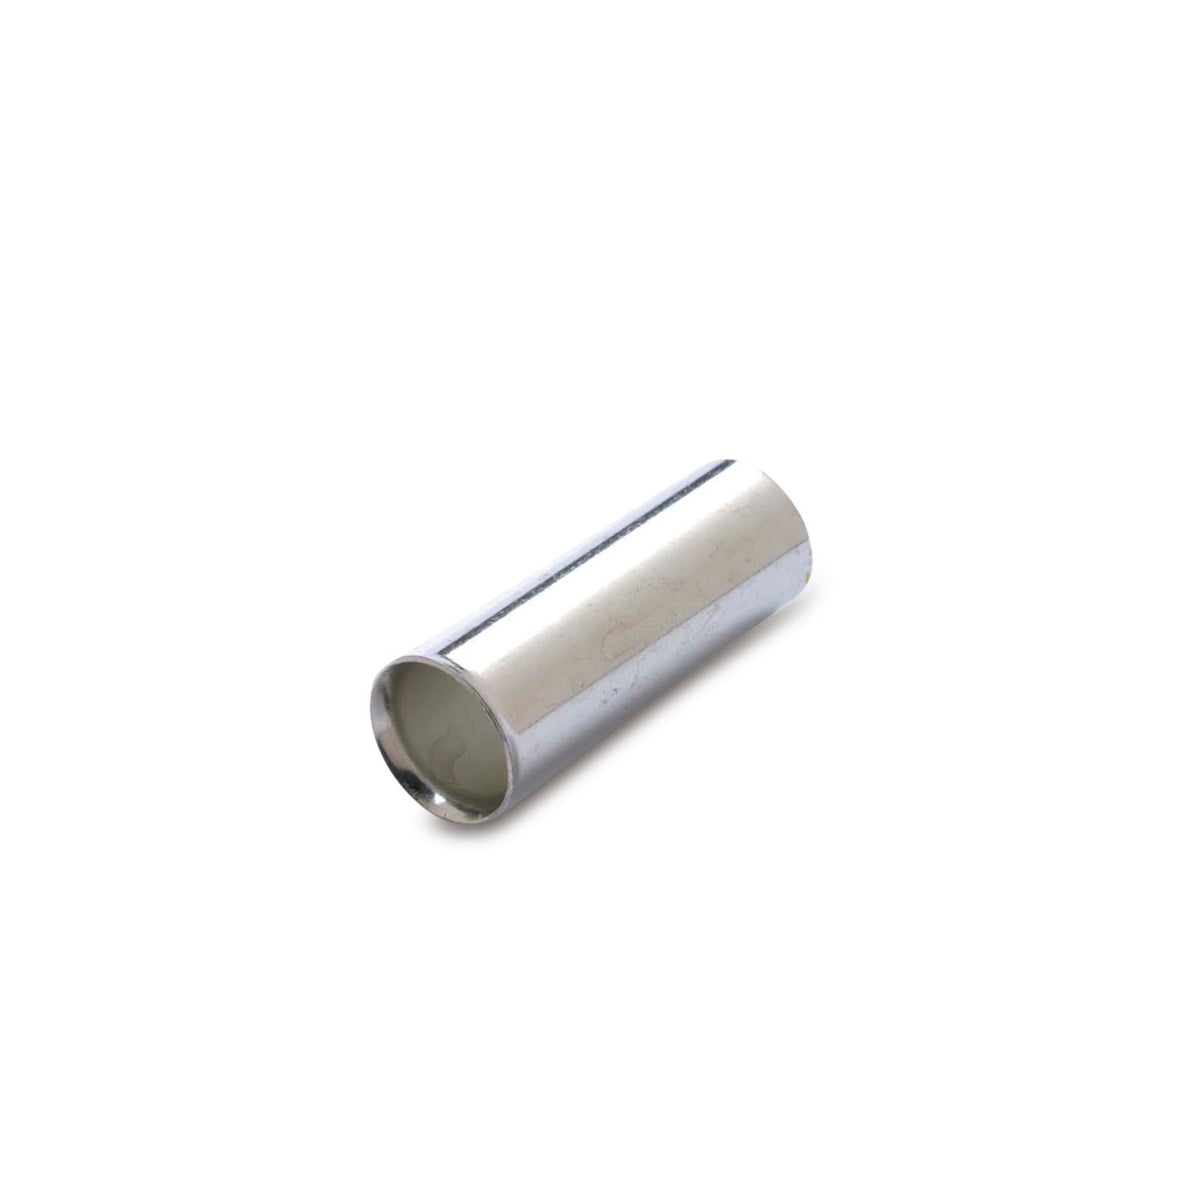 Single silver bootlace ferrule without insulating sleeve